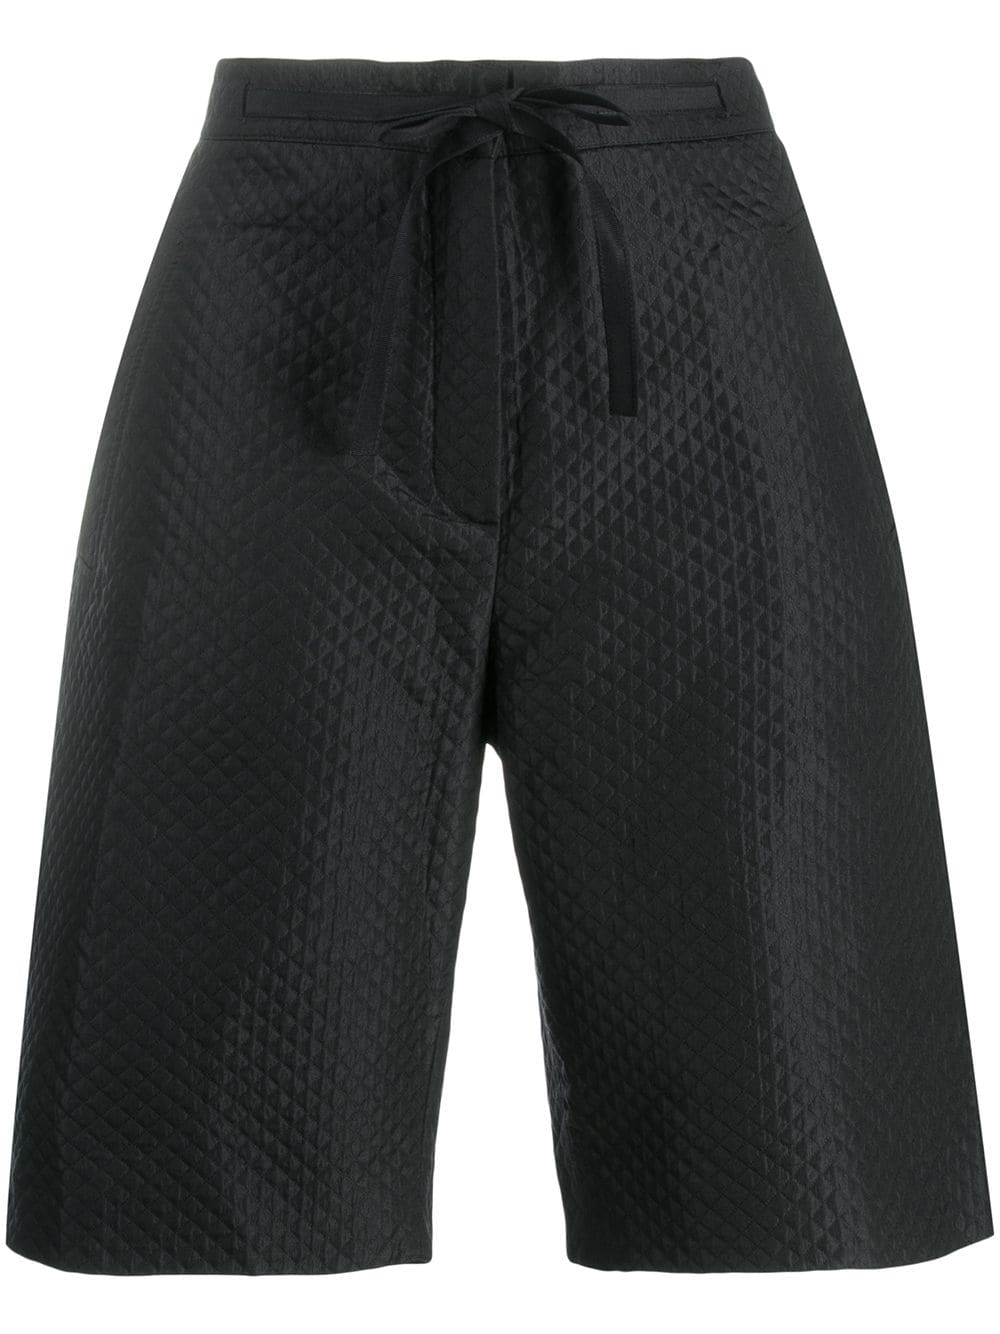 Christian Dior pre-owned quilted long shorts - Black von Christian Dior